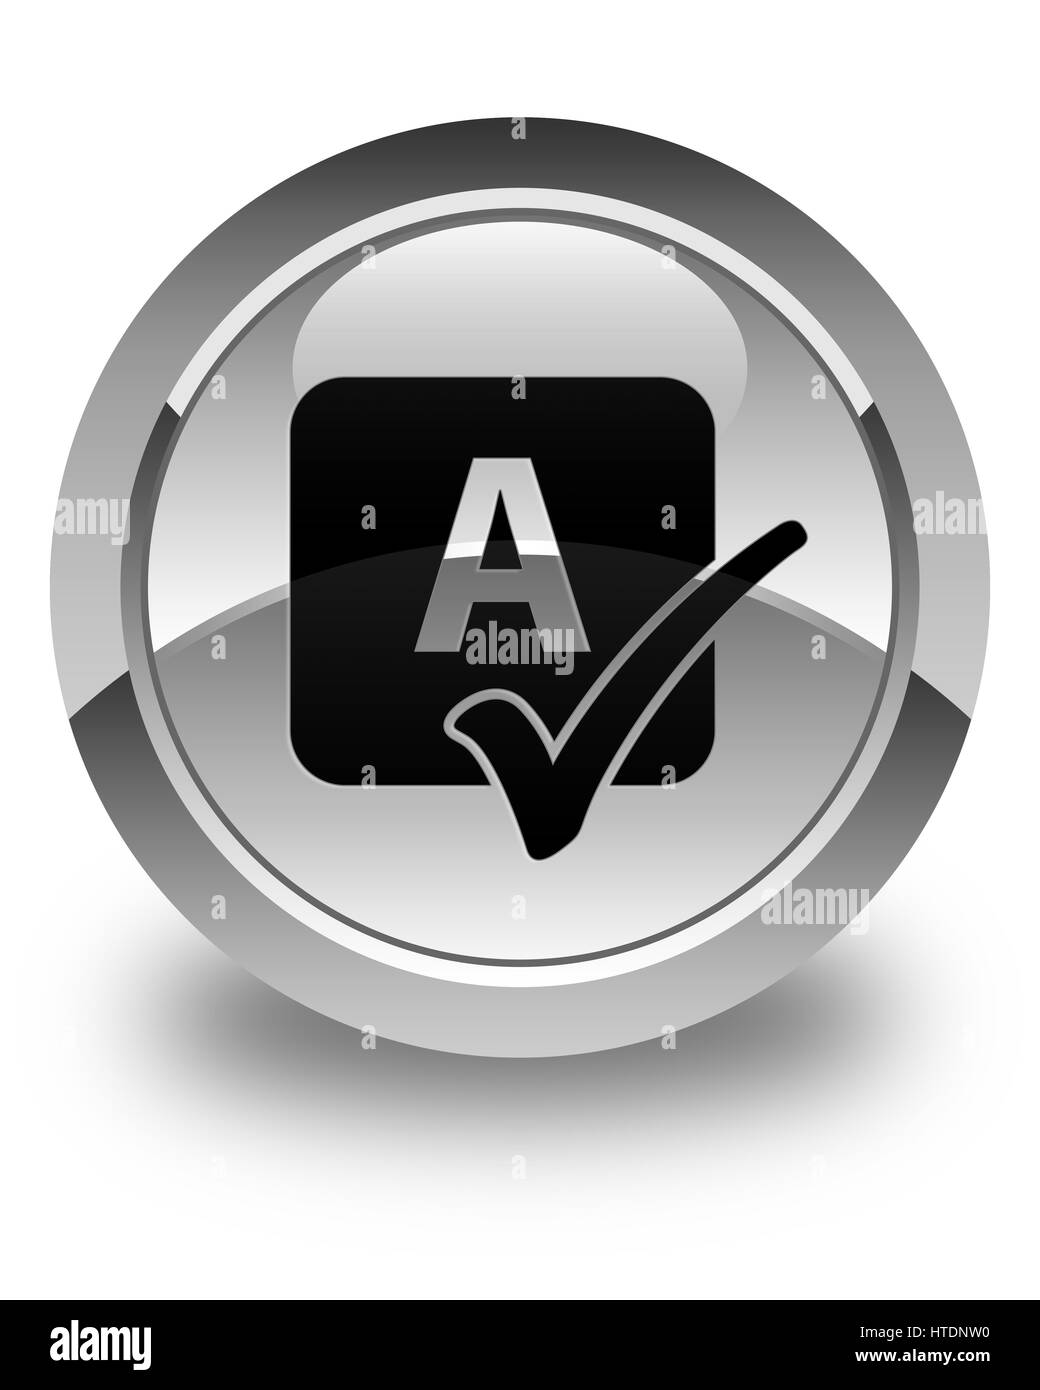 Spell check icon isolated on glossy white round button abstract illustration Stock Photo